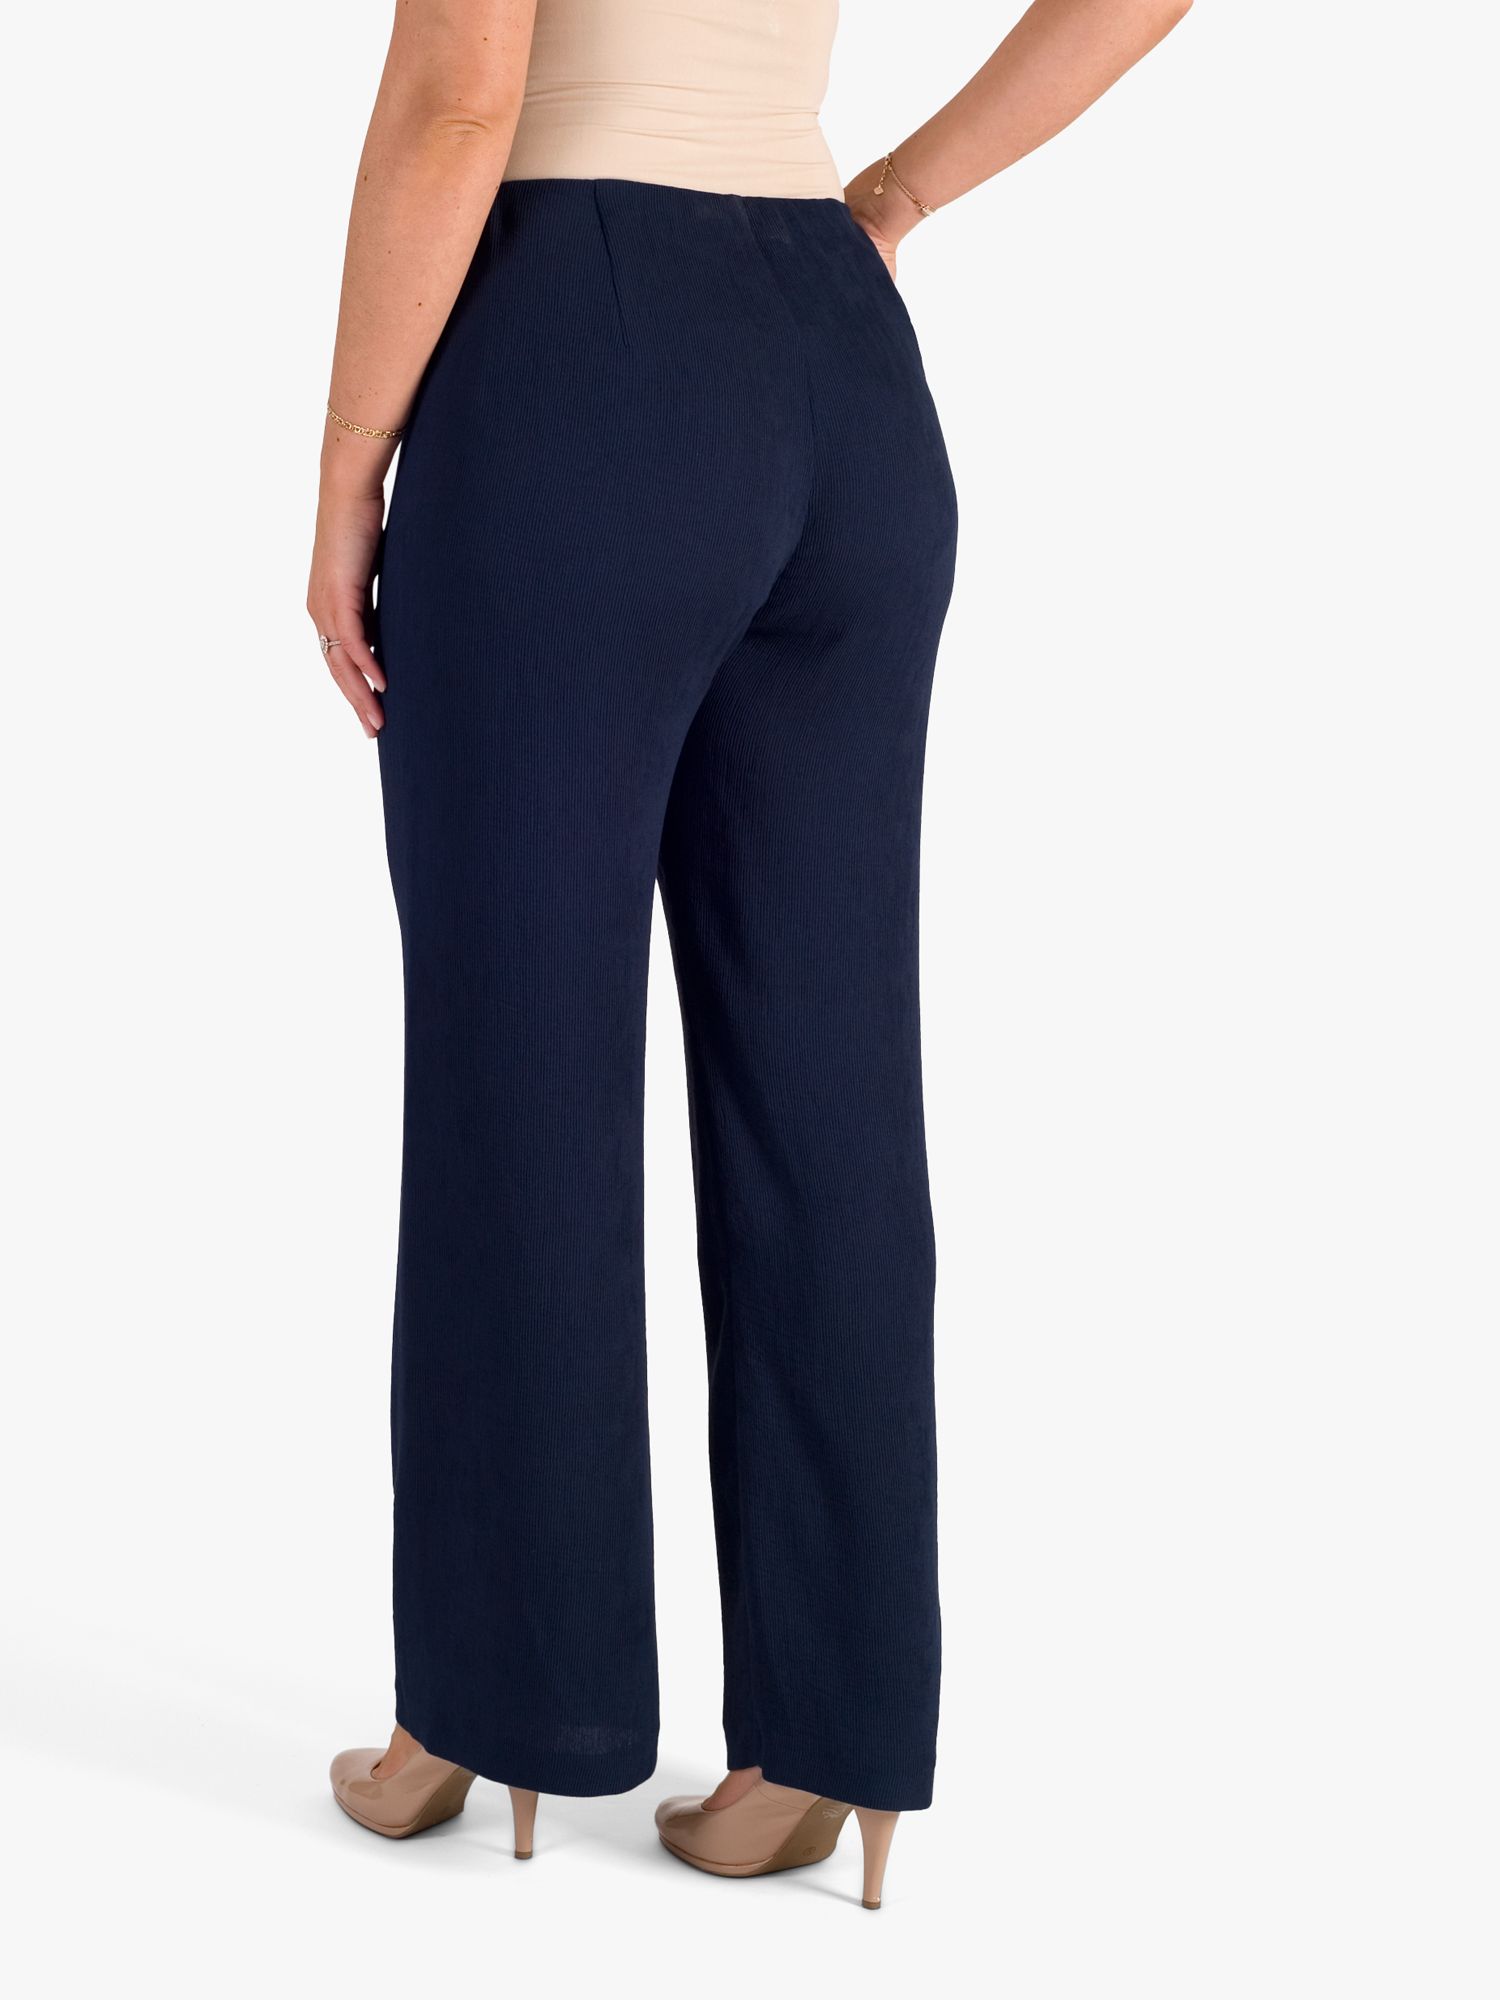 chesca Crinkle Trousers, Navy at John Lewis & Partners